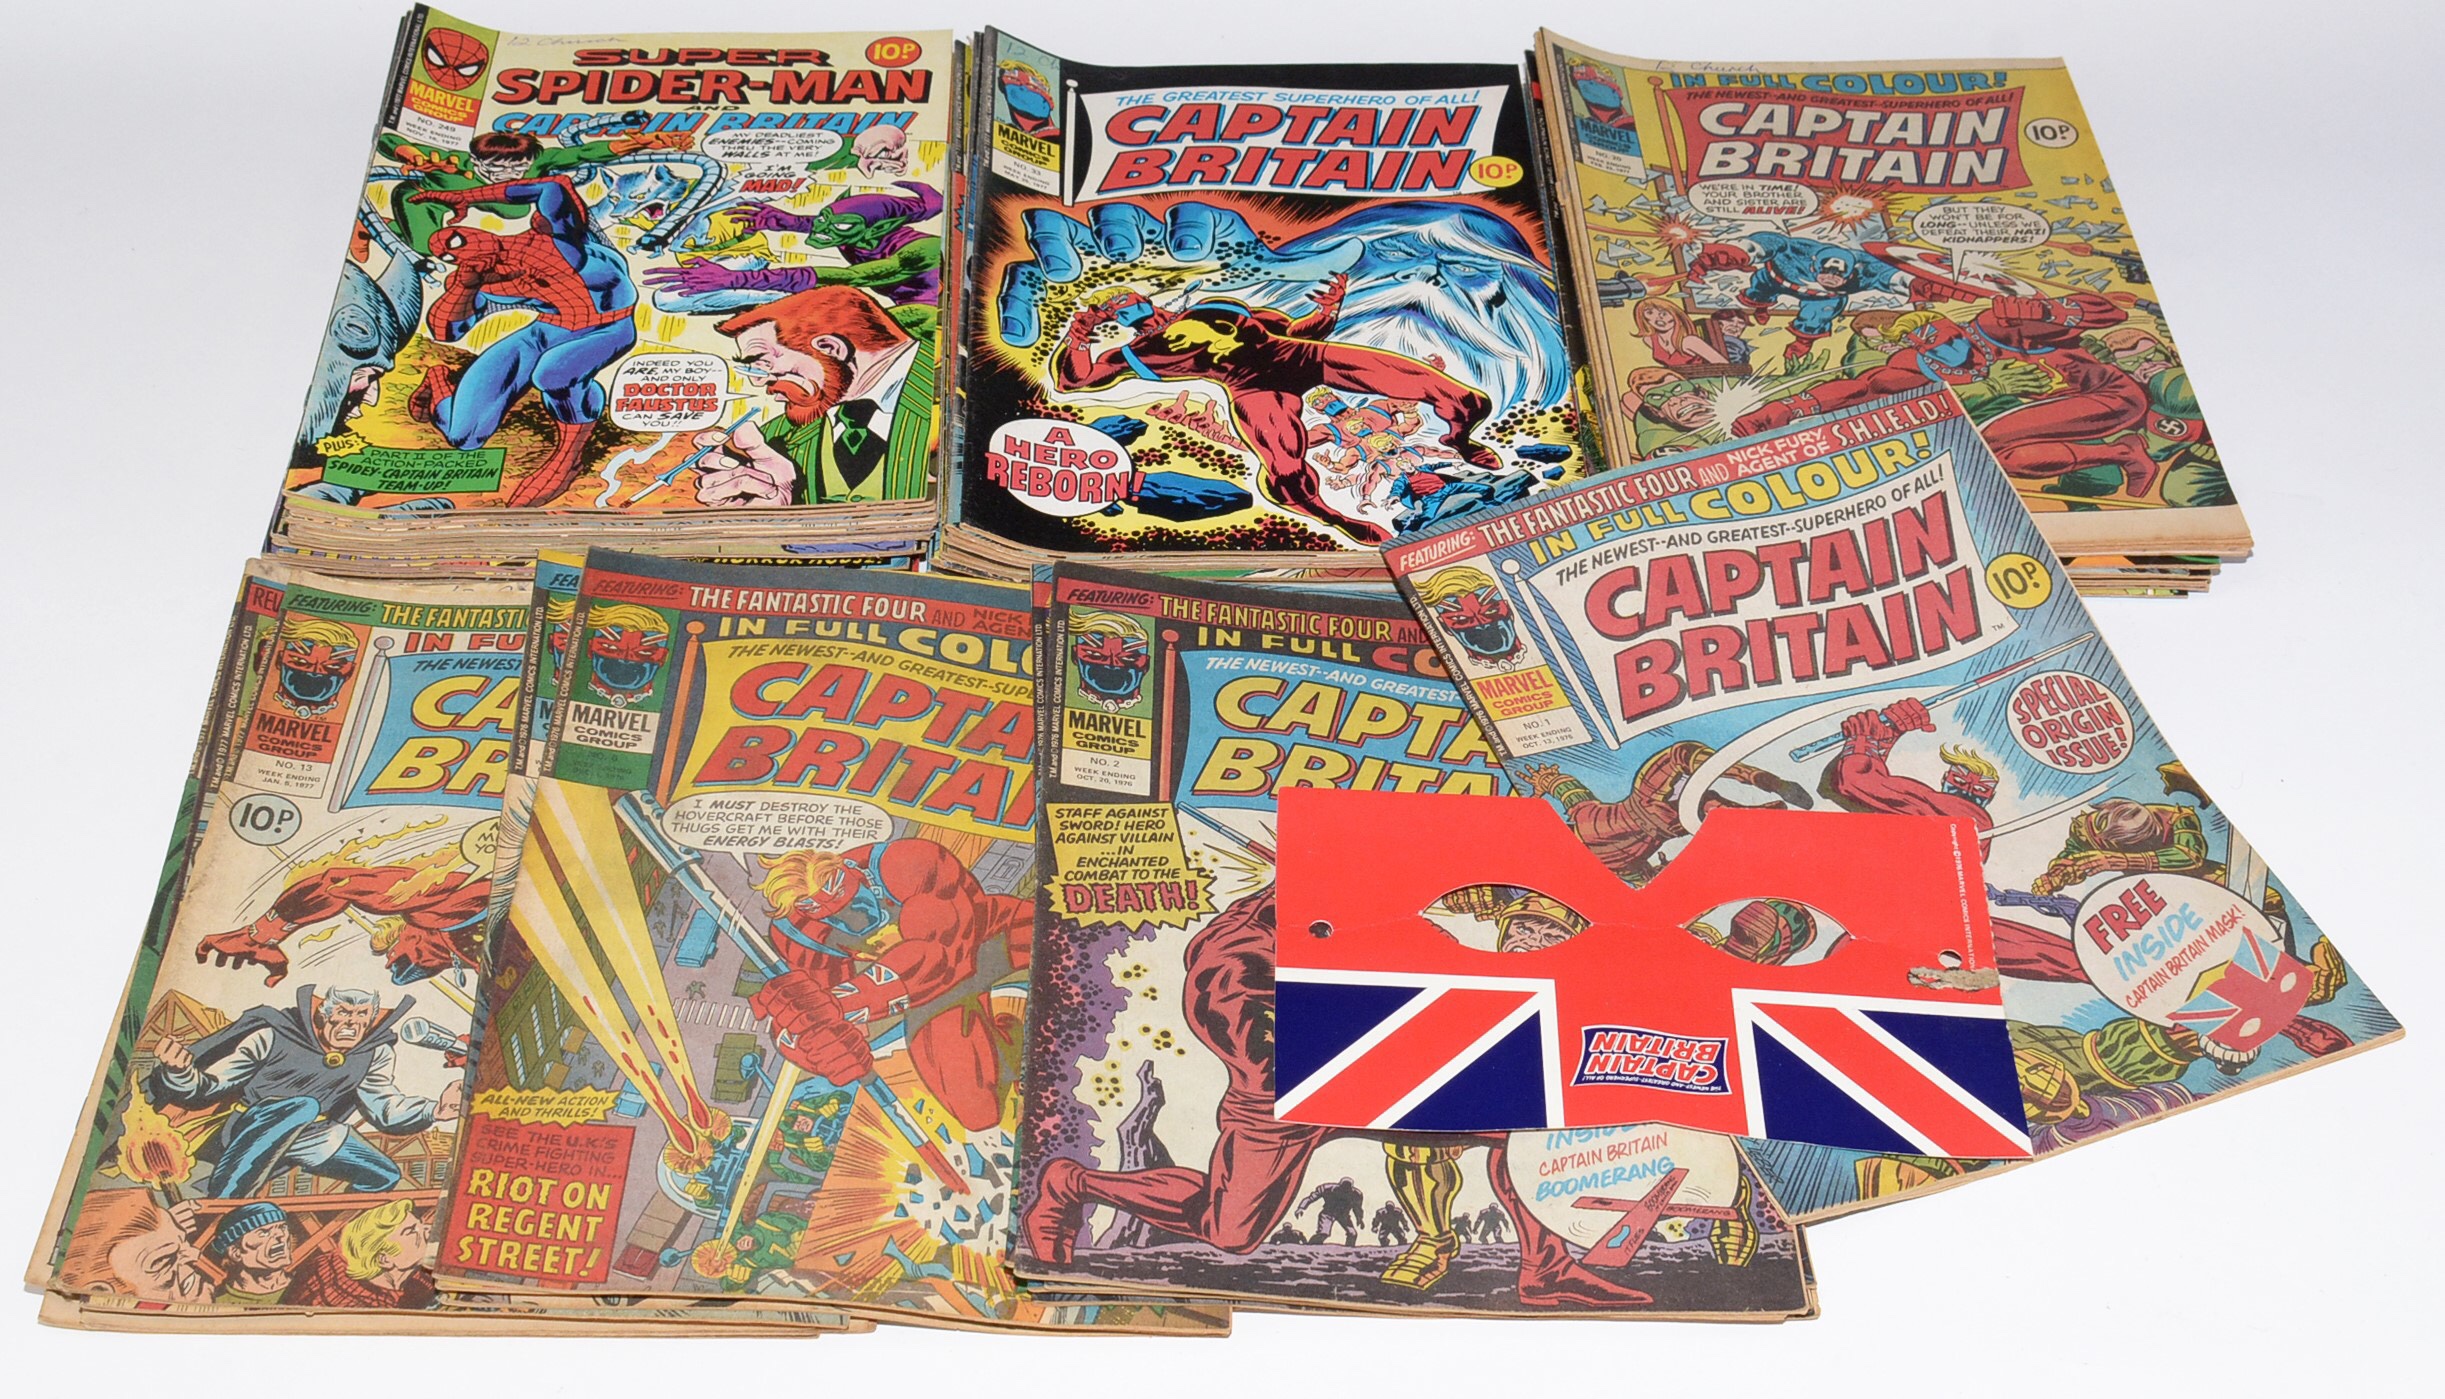 Captain Britain, No's. 1-39, complete with 1st edition give-away mask; together with Super Spider-Man & Captain Britain, No's. 231-253, (continuing and completing the first British run of this title)